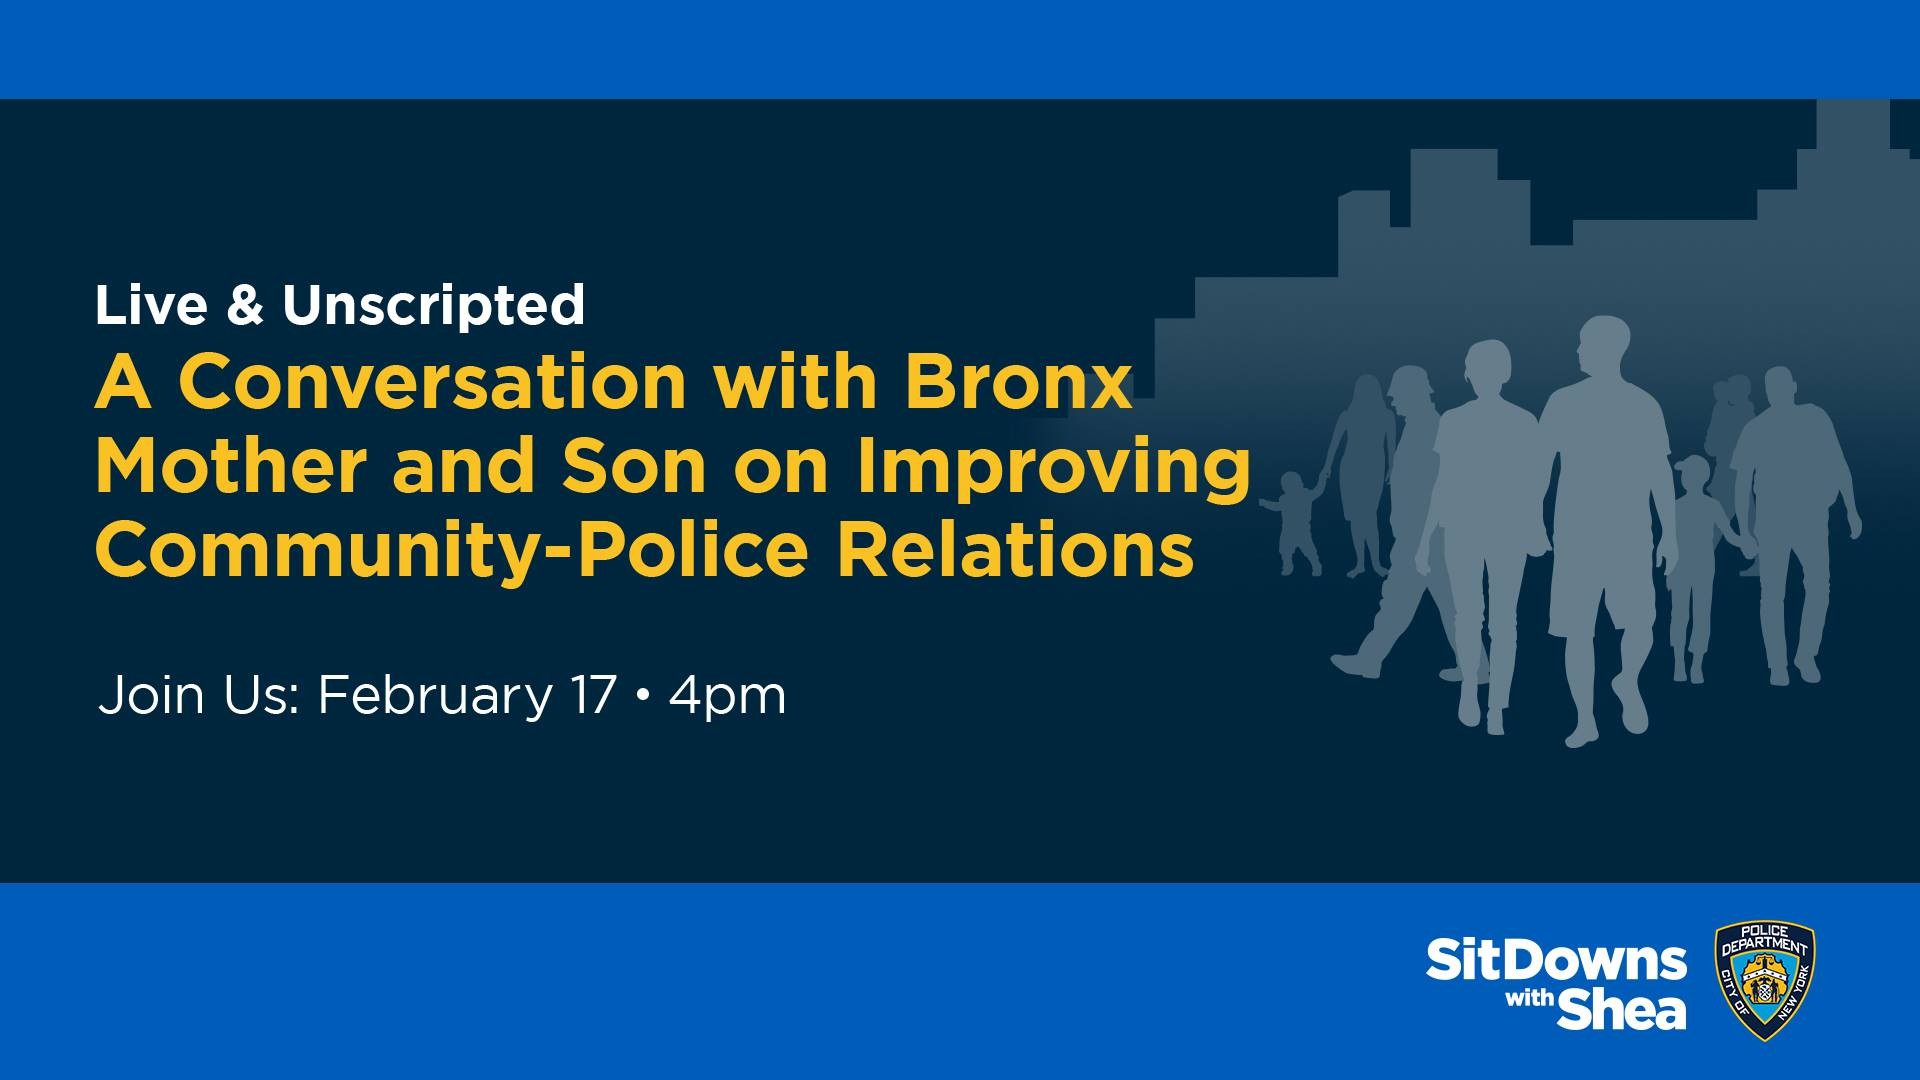 Live and Unscripted: A Conversation with Bronx Mother and Son on Improving Community-Police Relations